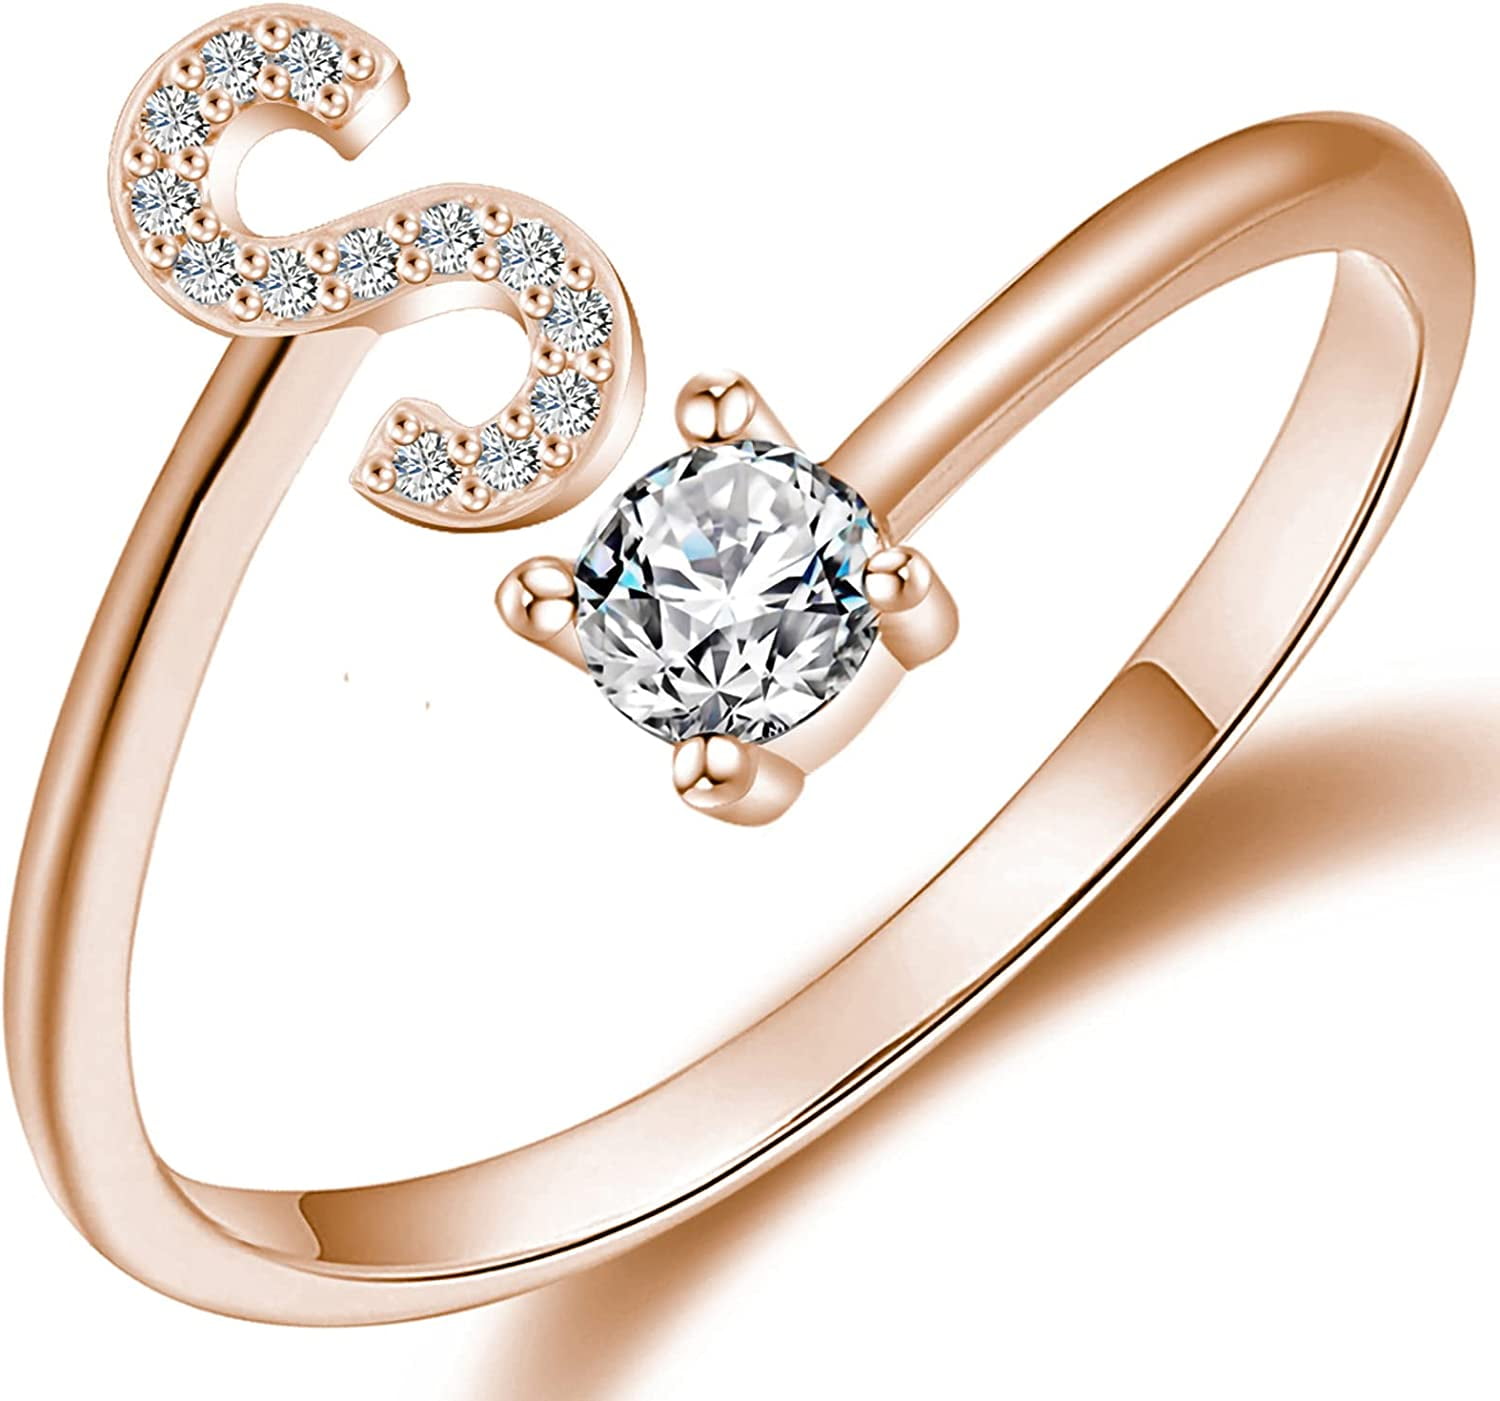 235-GR5674 - 22K Gold 'S' Initial Ring For Women With Cz | Initial ring,  Gold ring designs, 22k gold